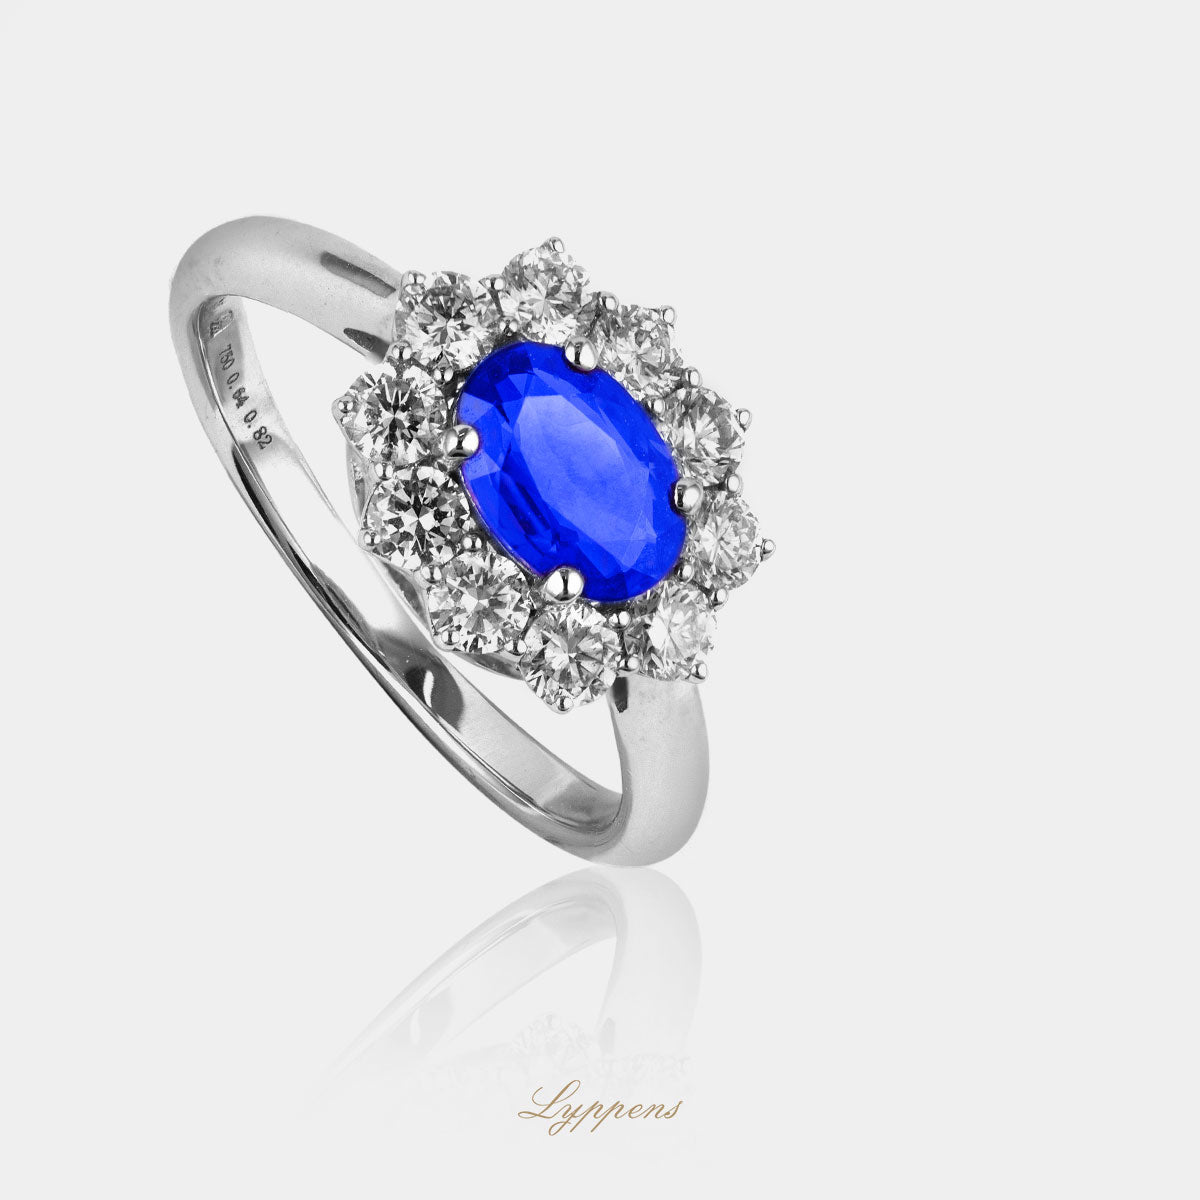 White gold entourage ring with sapphire and diamond